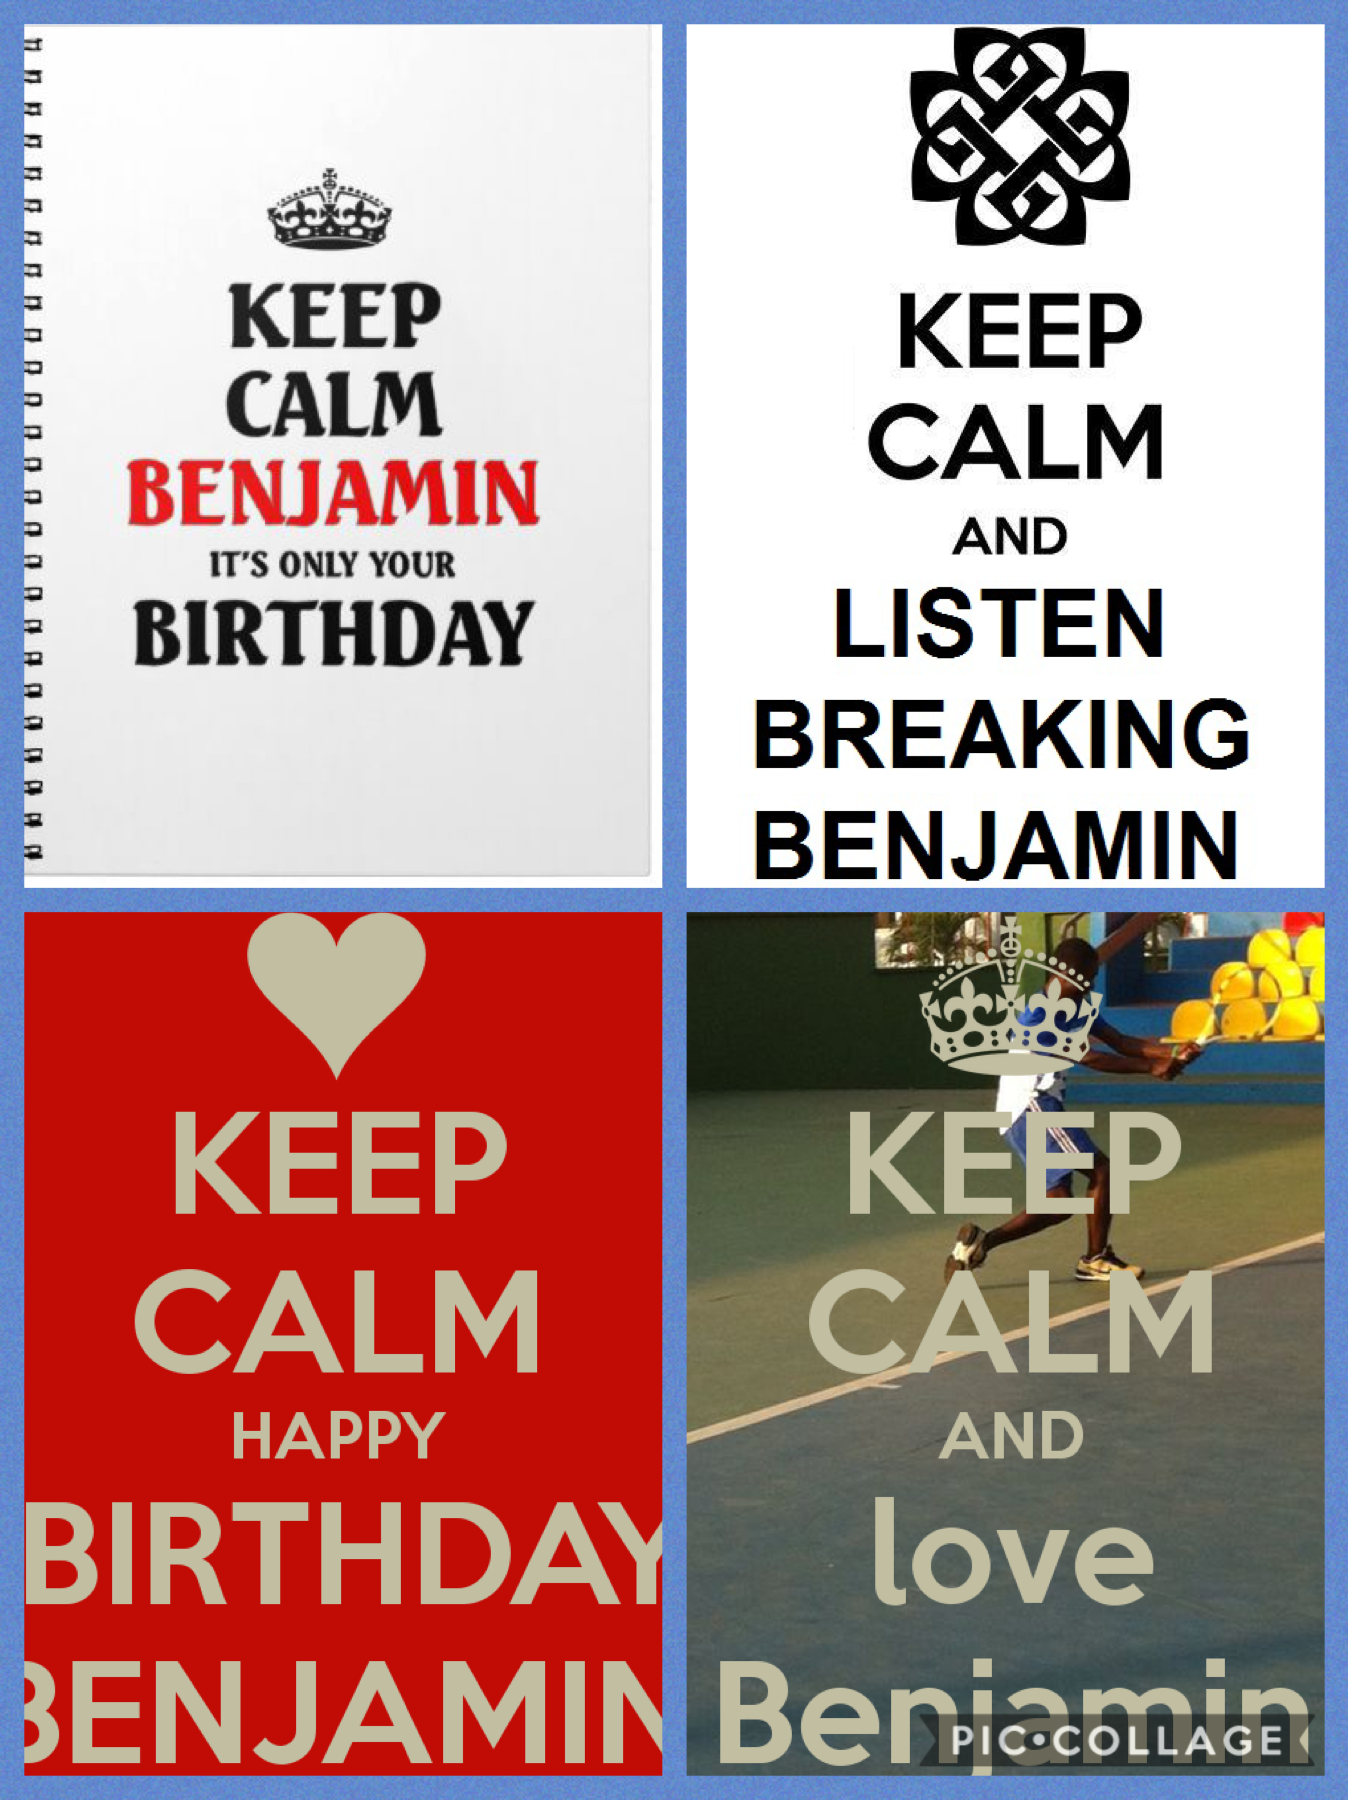 These are my top four favorites of Benjamin Keep Calms!